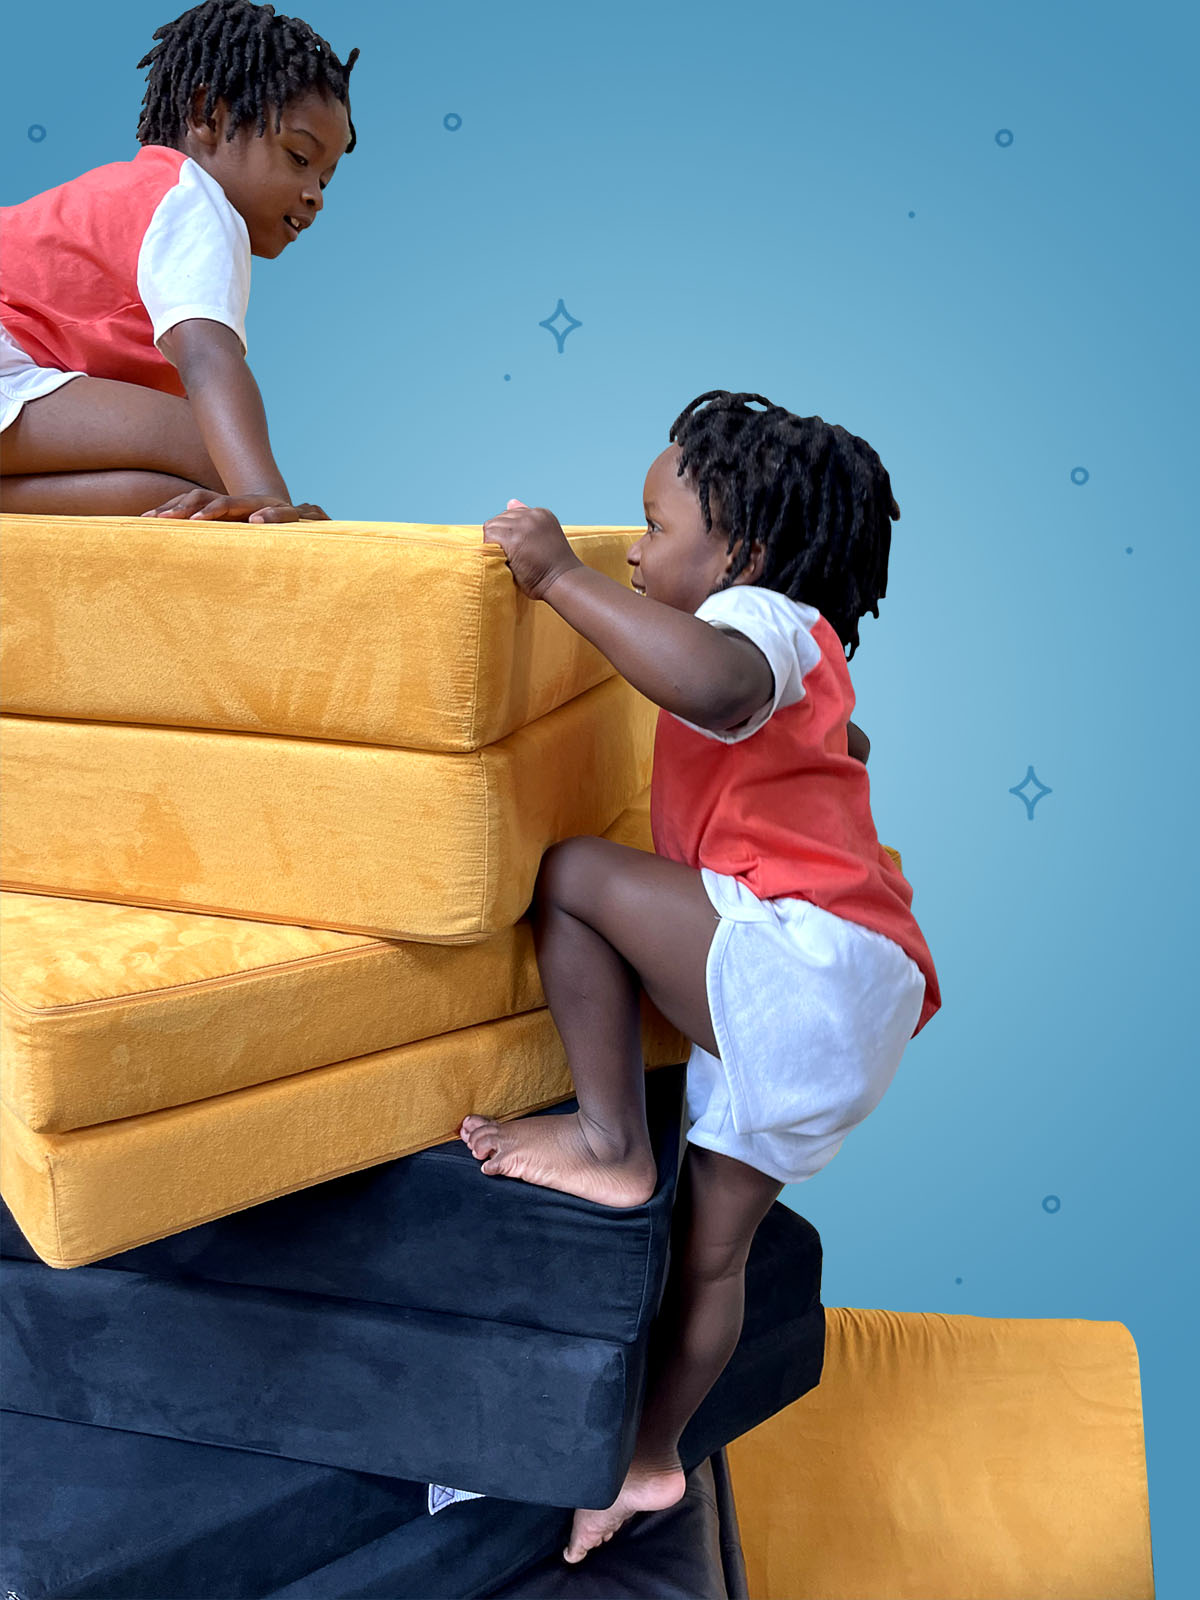 One child perched on top of a stack of cushions, looking down at other child who is climbing up the stack like a rock climber